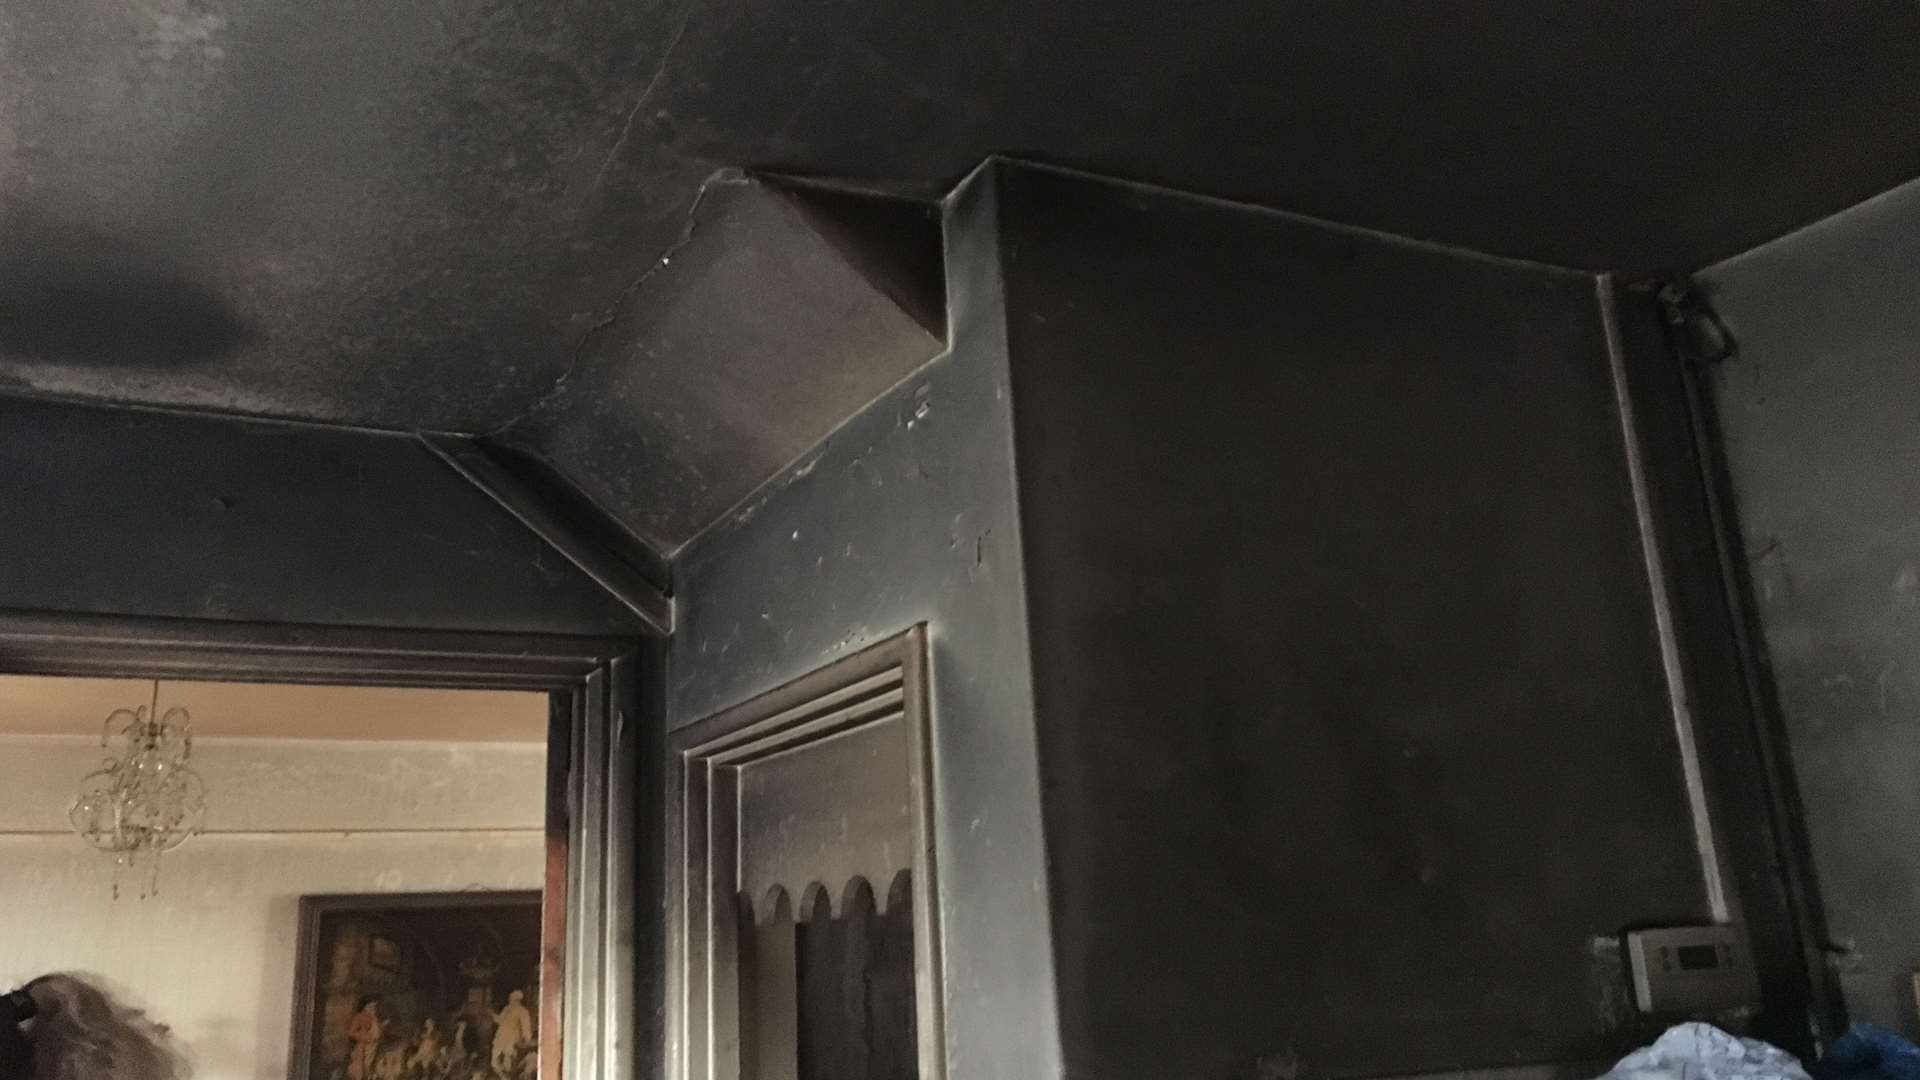 The blackened walls of the kitchen at Priest Avenue